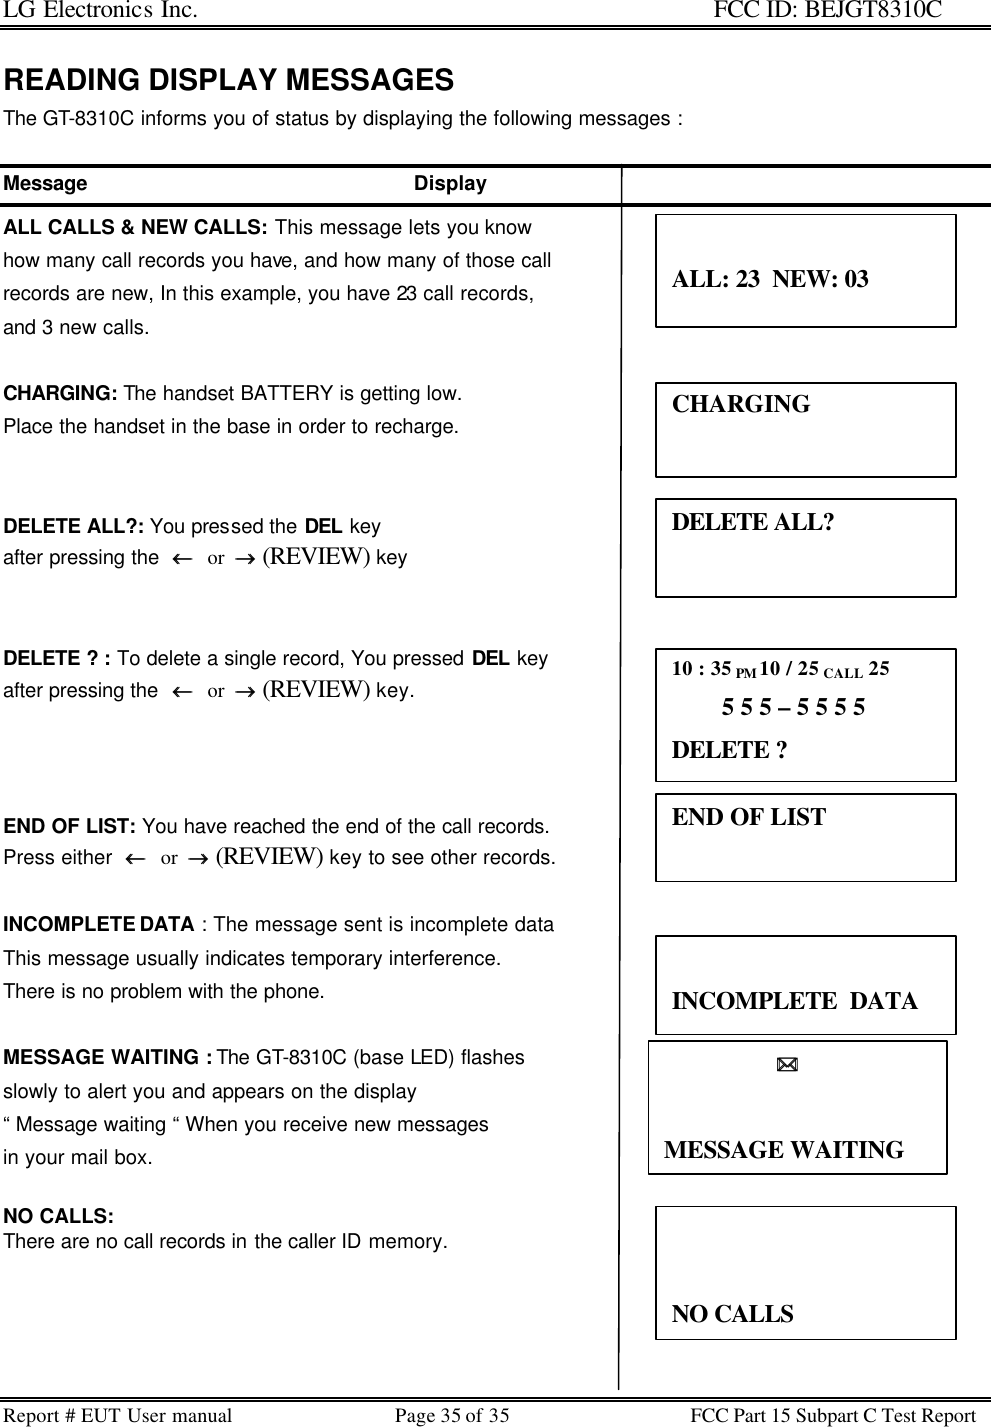 LG Electronics Inc.                                                                                                   FCC ID: BEJGT8310C Report # EUT User manual Page 35 of 35 FCC Part 15 Subpart C Test Report   READING DISPLAY MESSAGES The GT-8310C informs you of status by displaying the following messages :  Message                                                    Display ALL CALLS &amp; NEW CALLS: This message lets you know  how many call records you have, and how many of those call  records are new, In this example, you have 23 call records,  and 3 new calls.   CHARGING: The handset BATTERY is getting low.  Place the handset in the base in order to recharge.                        DELETE ALL?: You pressed the DEL key after pressing the  ←←  or  →→ (REVIEW) key     DELETE ? : To delete a single record, You pressed DEL key after pressing the  ←←  or  →→ (REVIEW) key.       END OF LIST: You have reached the end of the call records.  Press either  ←←  or  →→ (REVIEW) key to see other records.                                    INCOMPLETE DATA : The message sent is incomplete data This message usually indicates temporary interference.  There is no problem with the phone.   MESSAGE WAITING : The GT-8310C (base LED) flashes  slowly to alert you and appears on the display  “ Message waiting “ When you receive new messages  in your mail box.   NO CALLS:  There are no call records in the caller ID memory.                              ALL: 23  NEW: 03  CHARGING  DELETE ALL?  END OF LIST   INCOMPLETE  DATA                   ))  MESSAGE WAITING 10 : 35 PM 10 / 25 CALL 25         5 5 5 – 5 5 5 5 DELETE ?   NO CALLS 